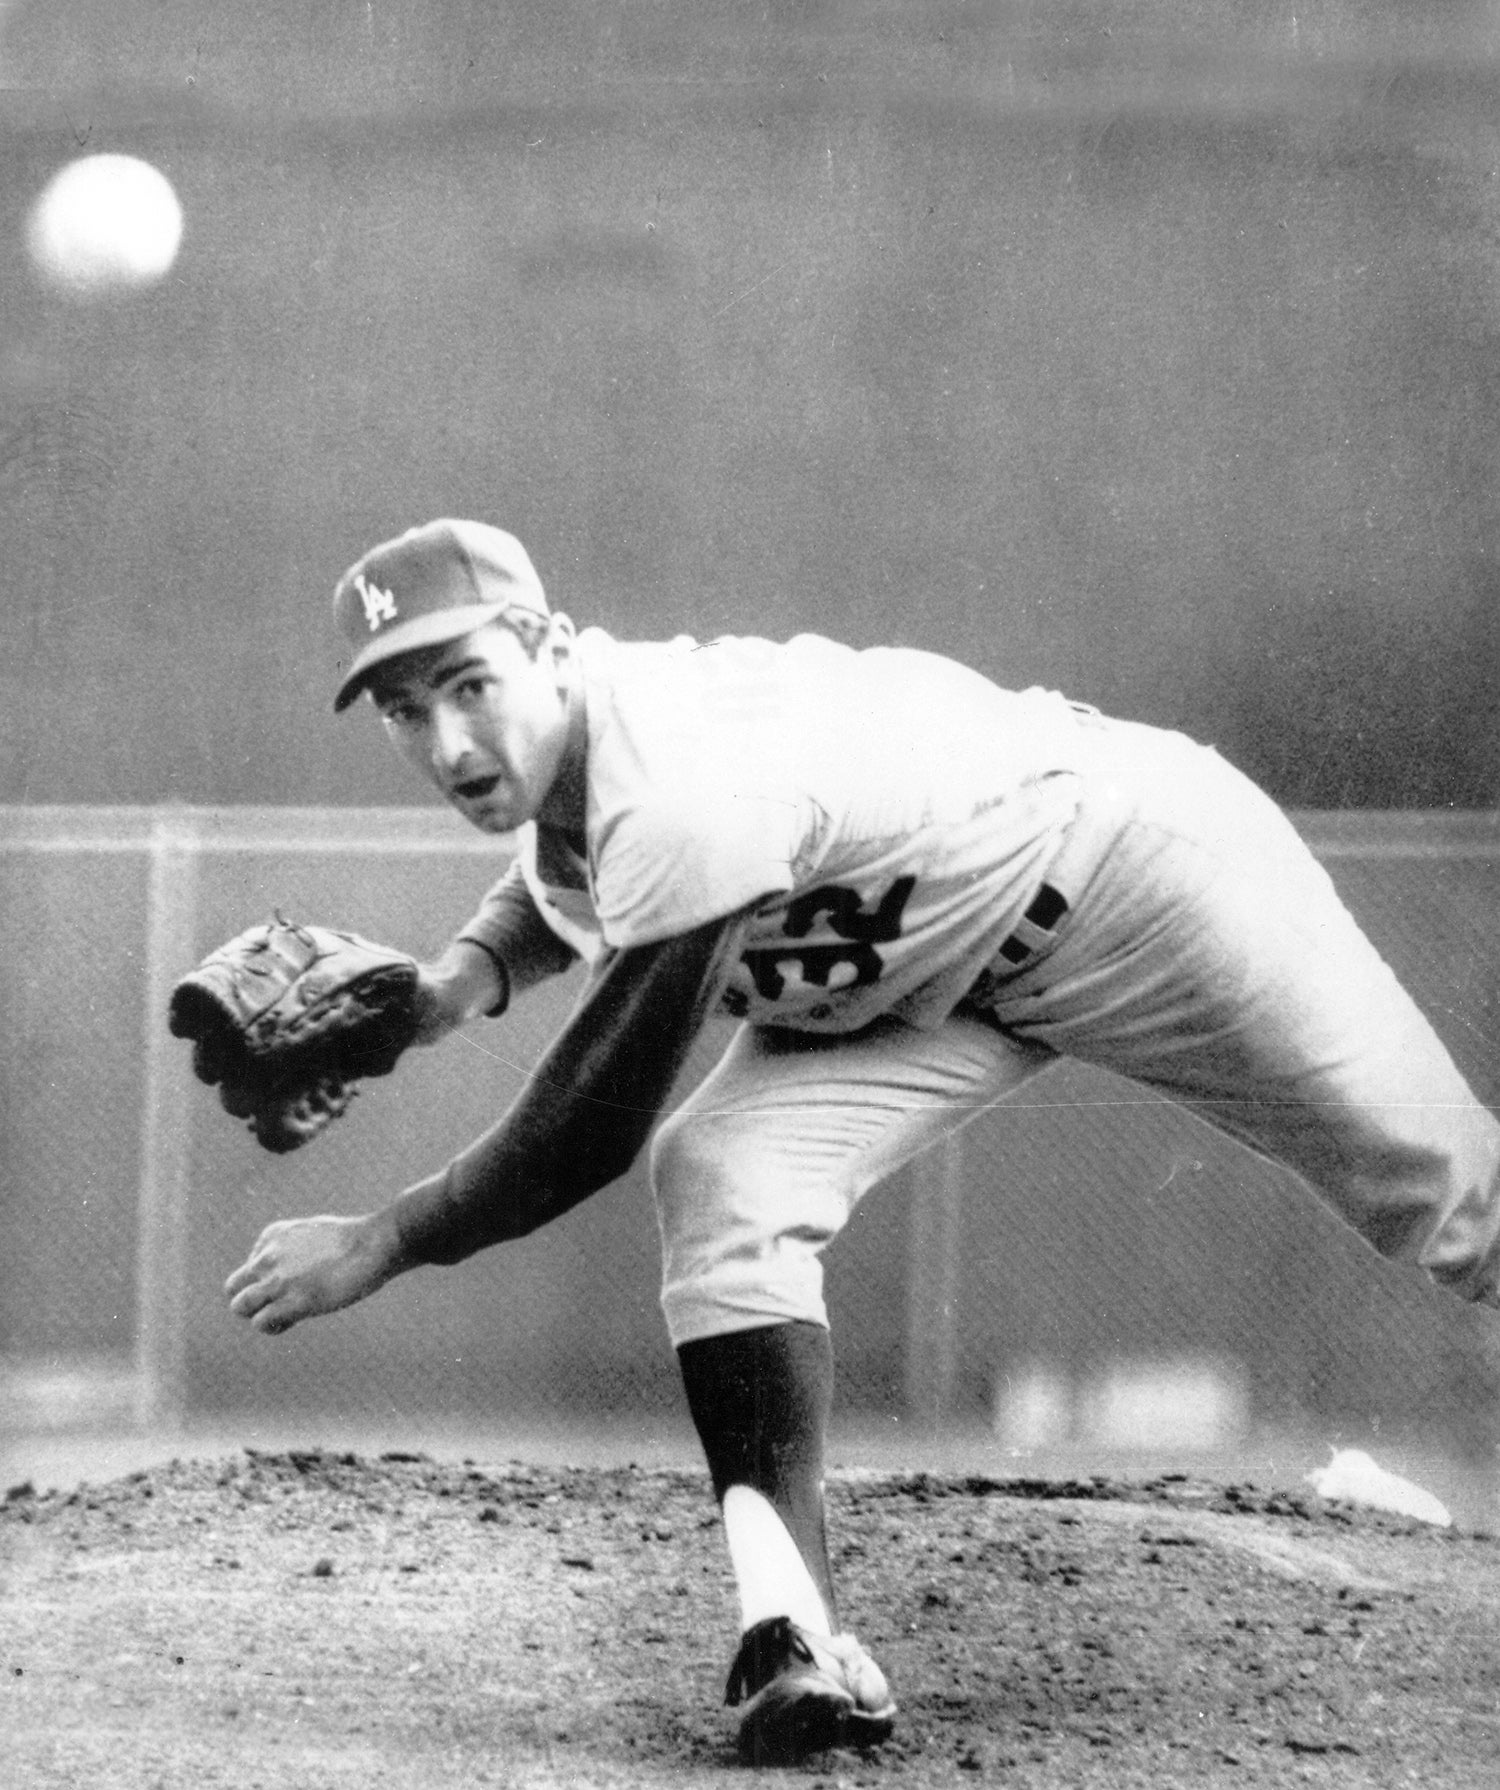 Sandy Koufax responded to a higher calling on Yom Kippur in 1965